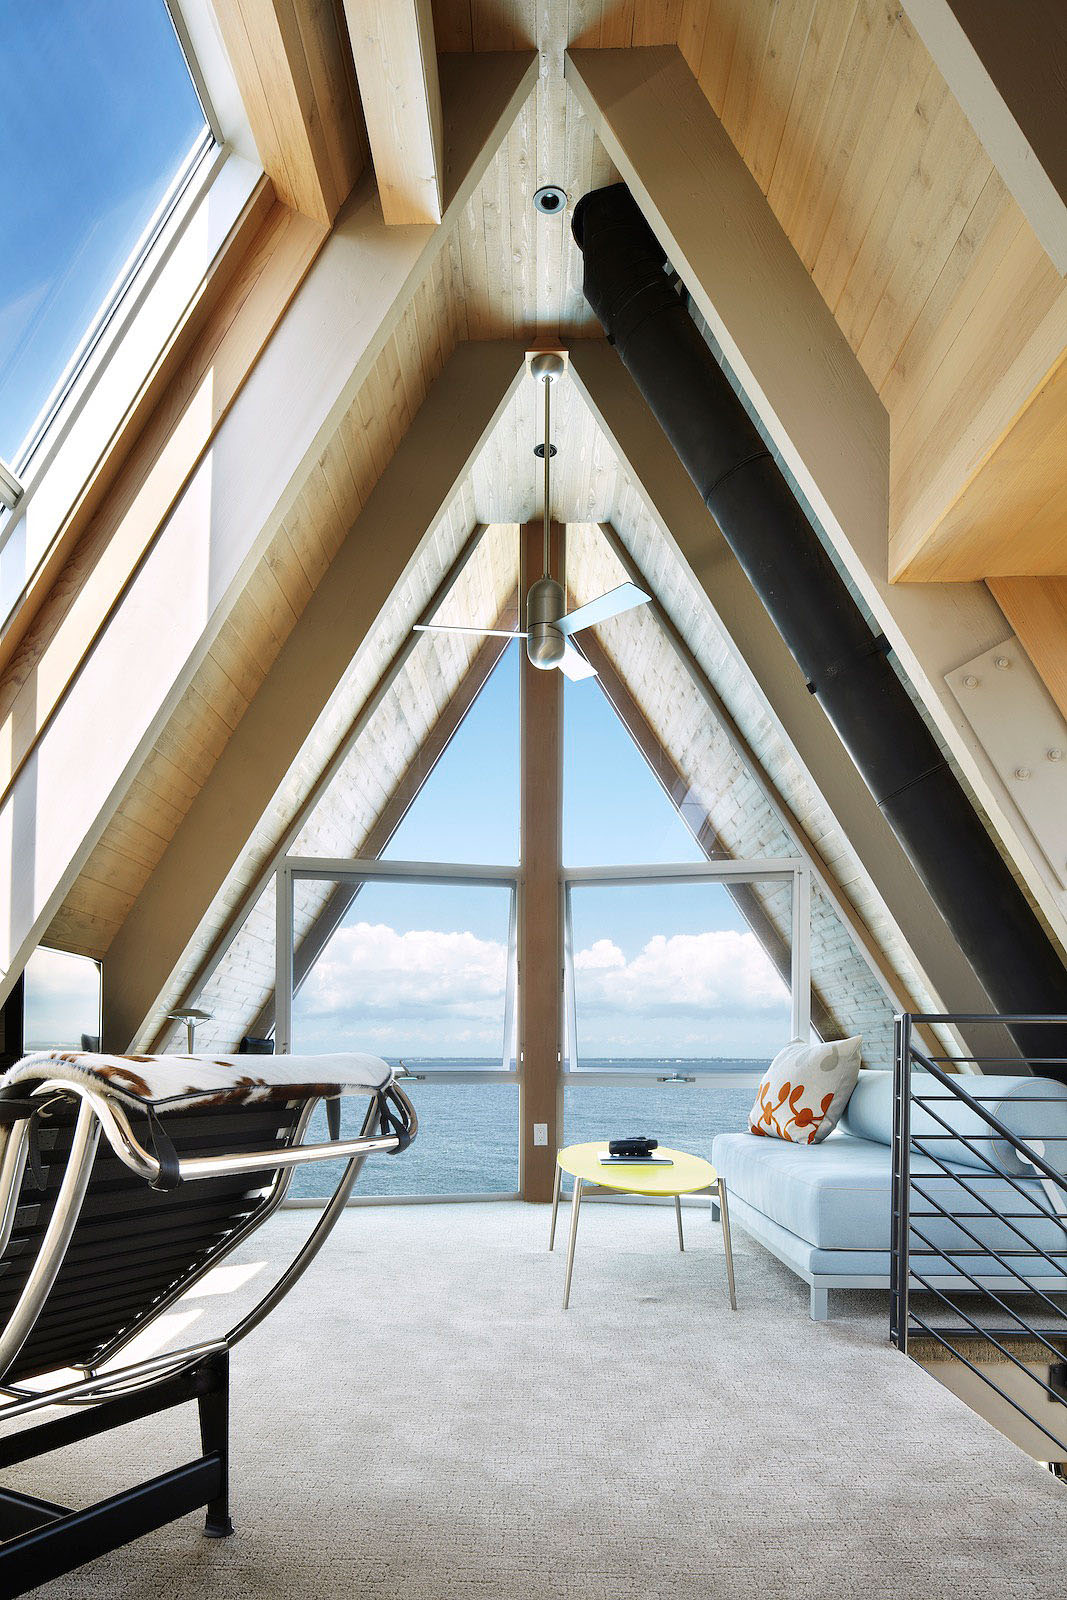 Attic Level Room with Ocean View